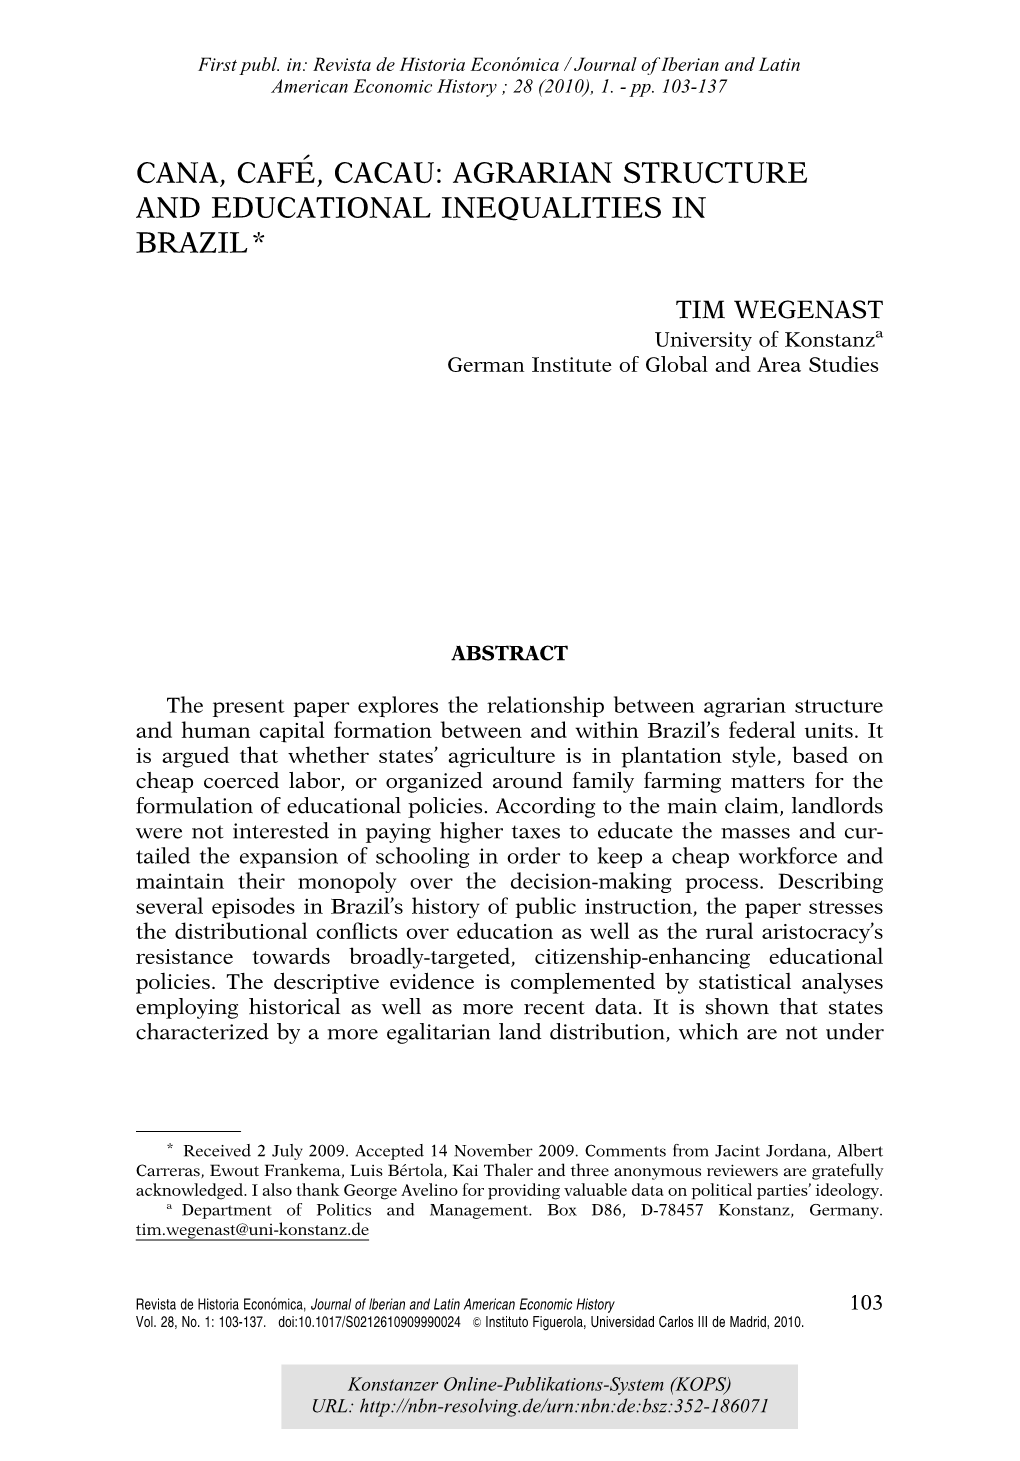 Cana, Café, Cacau: Agrarian Structure and Educational Inequalities in Brazil